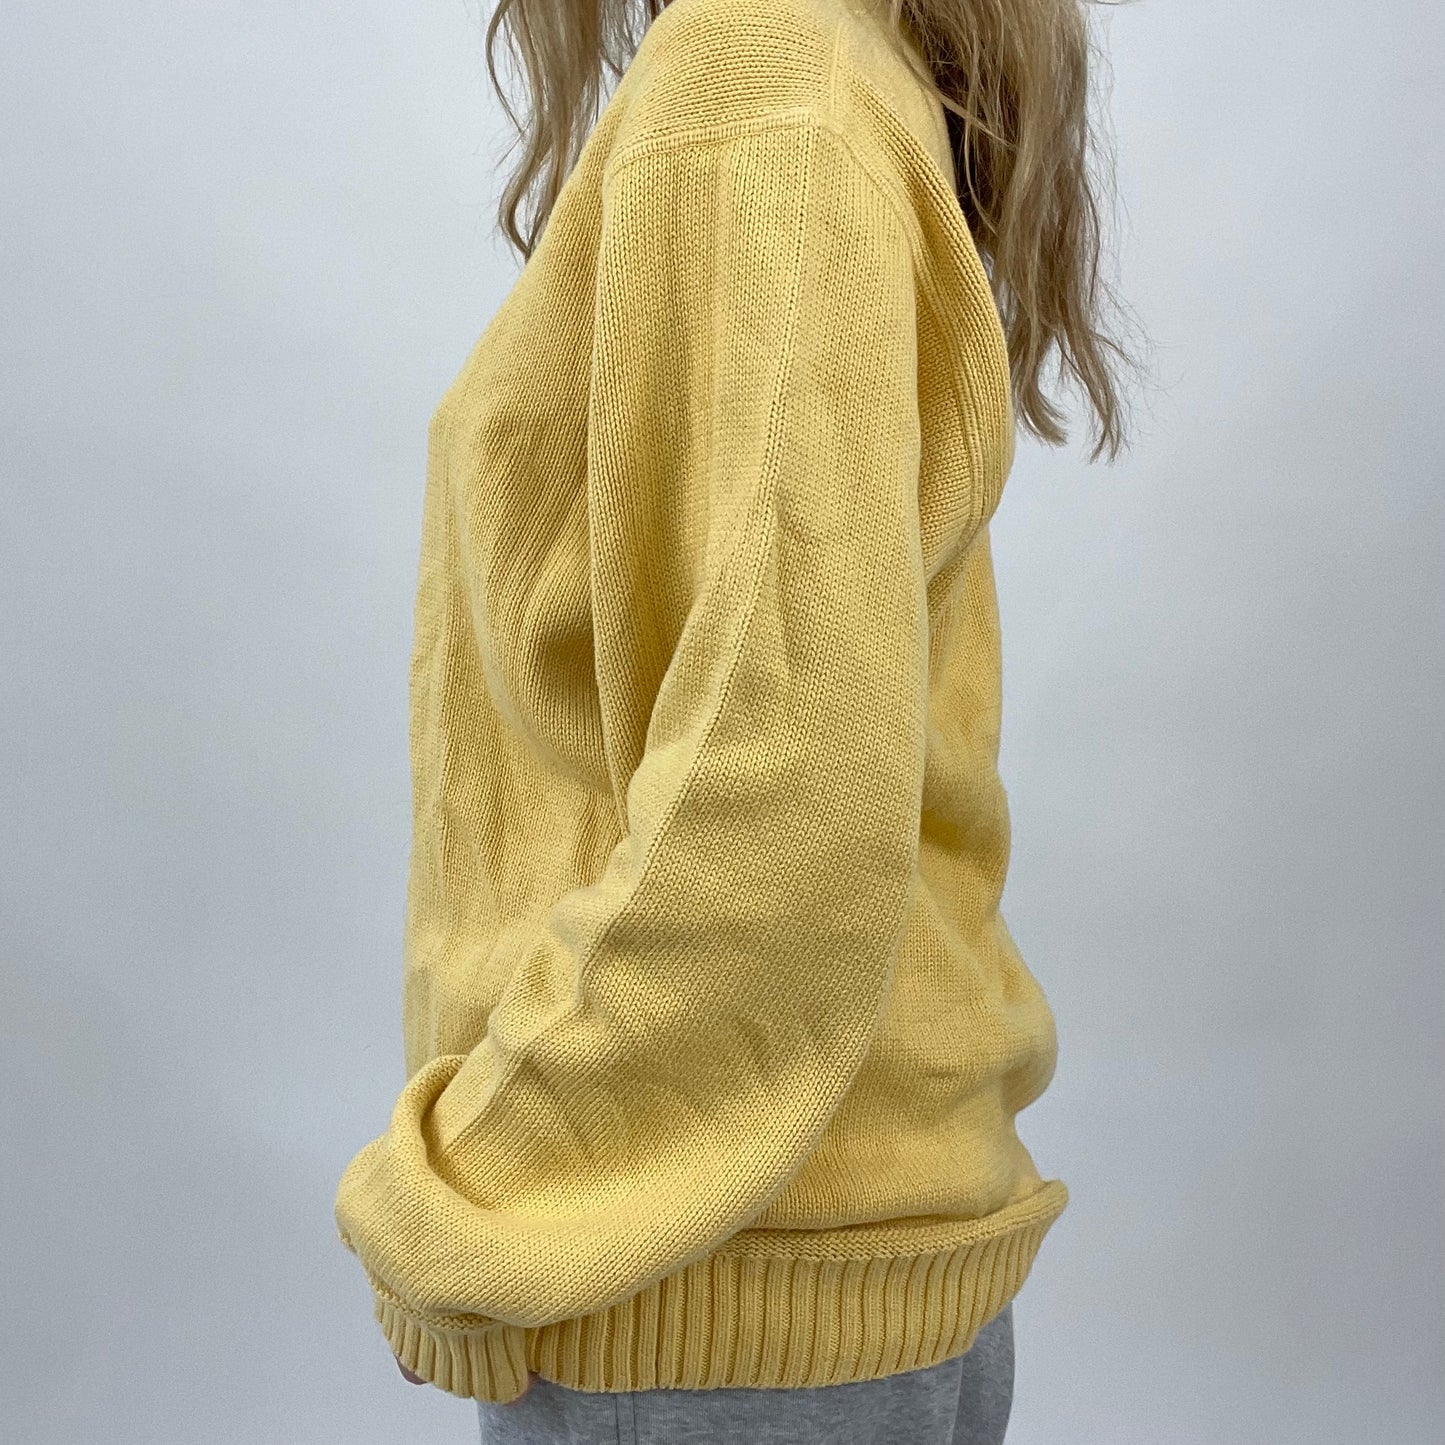 💻BLOKECORE DROP | yellow tommy hilfiger knitted jumper - xl